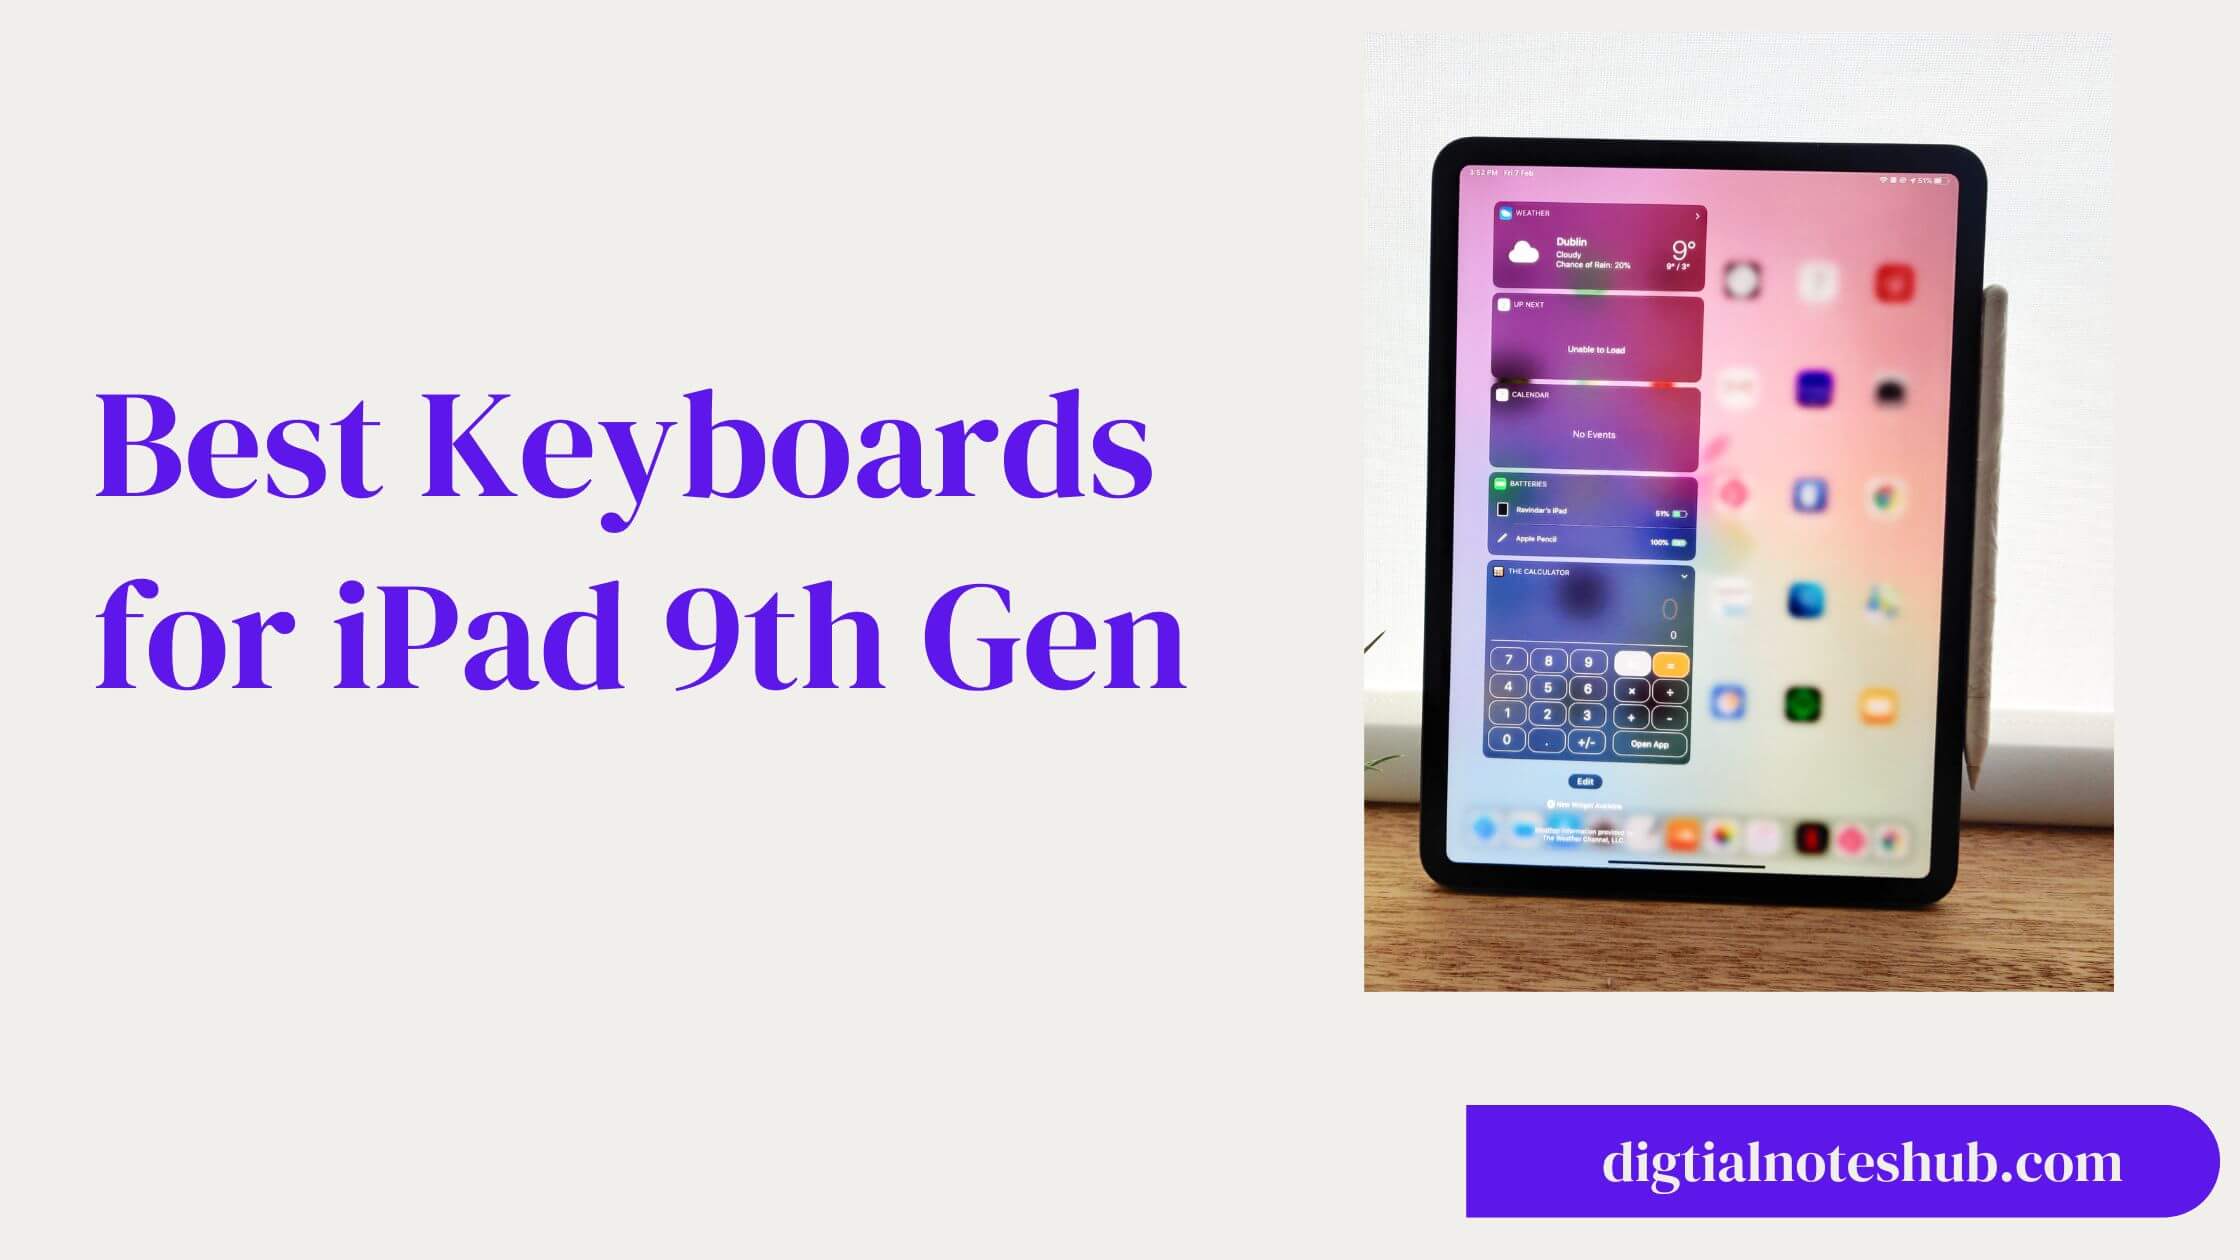 Best keyboards for iPad 9th generation